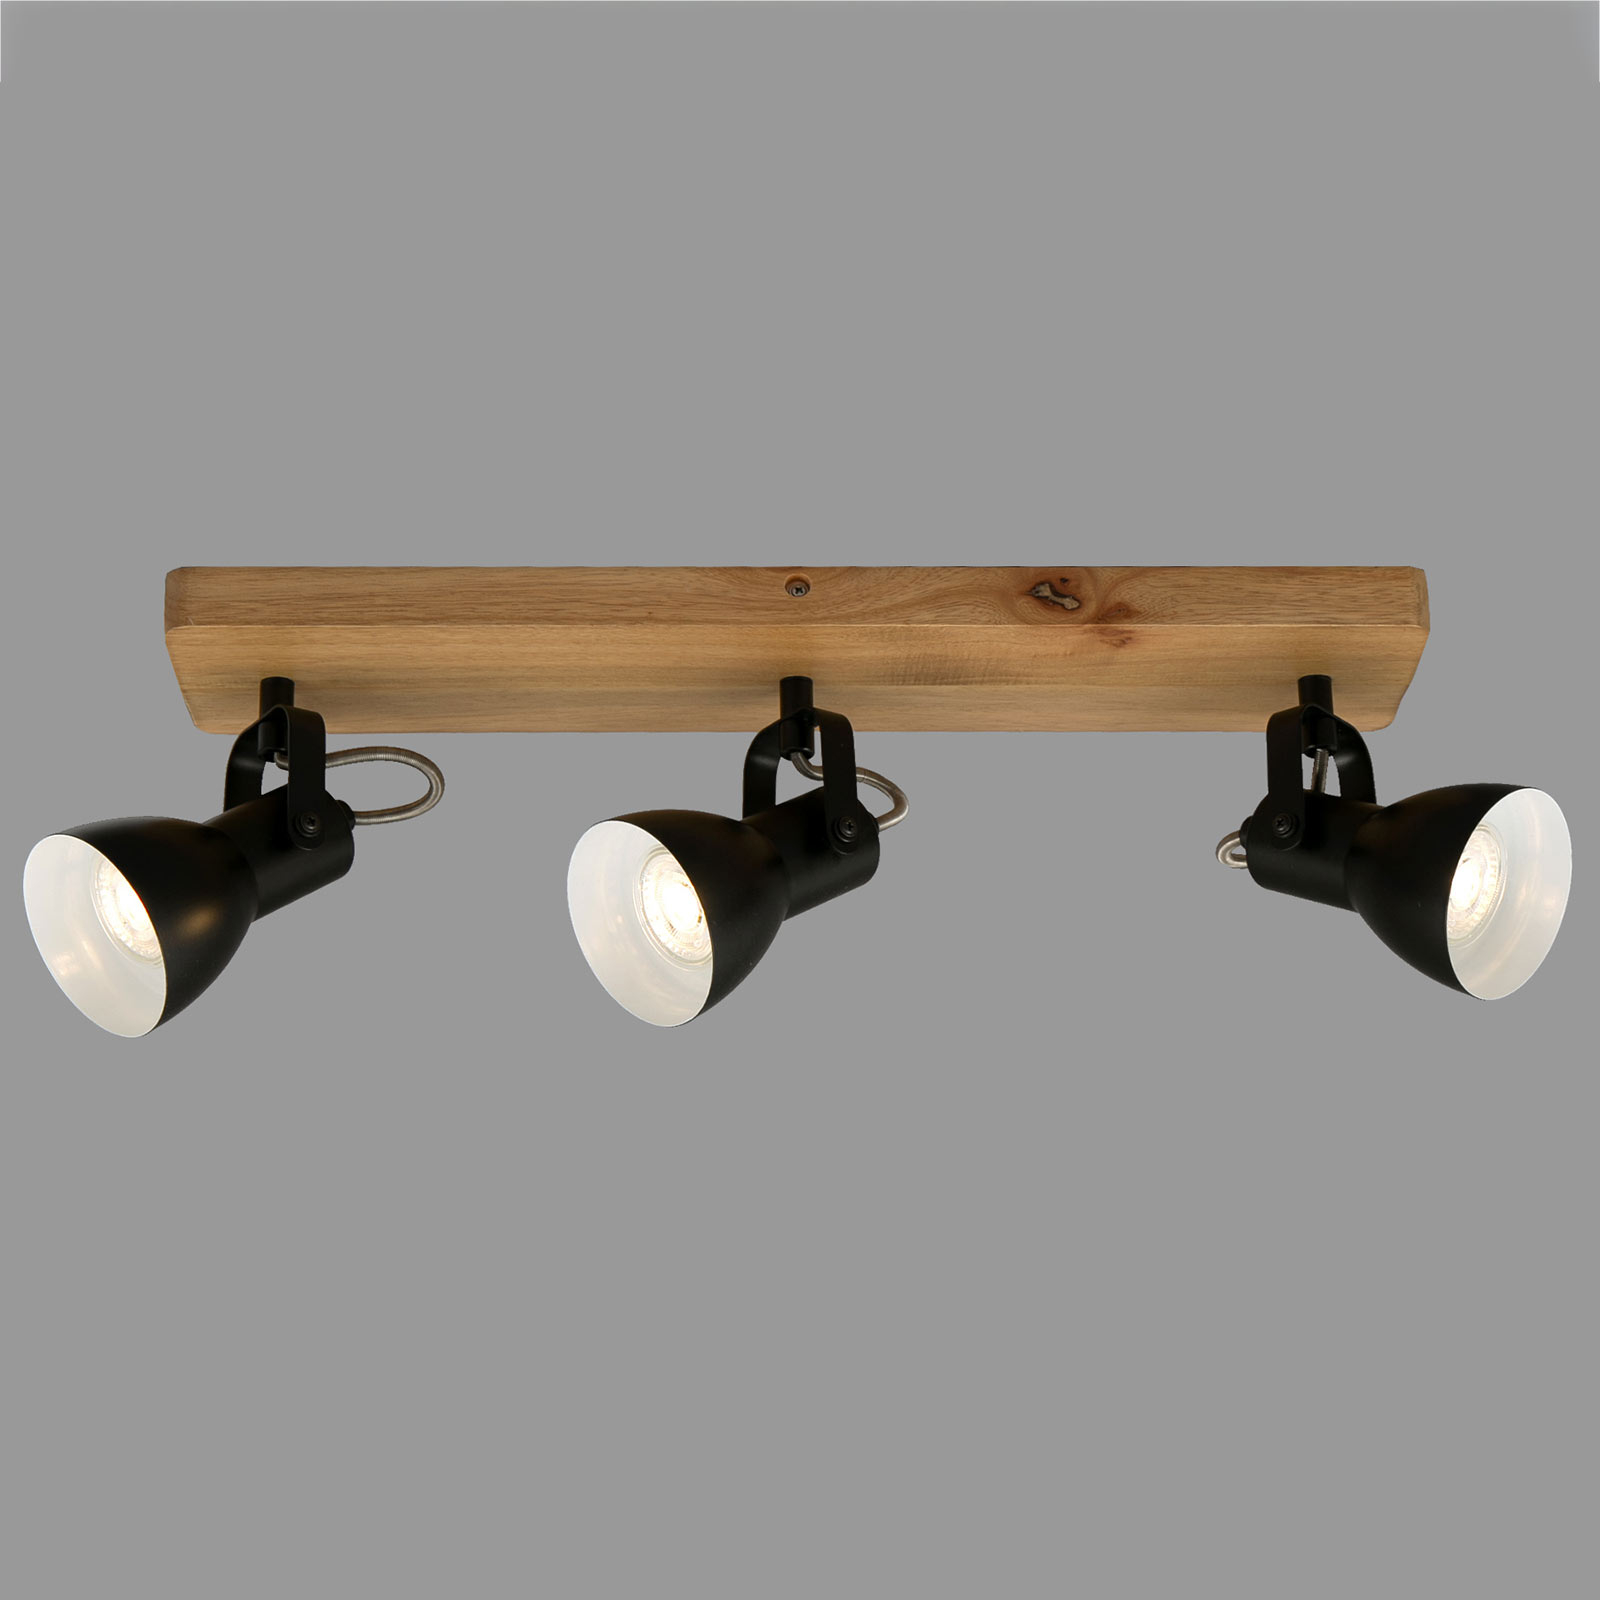 Arbo downlight with wooden element, 3-bulb